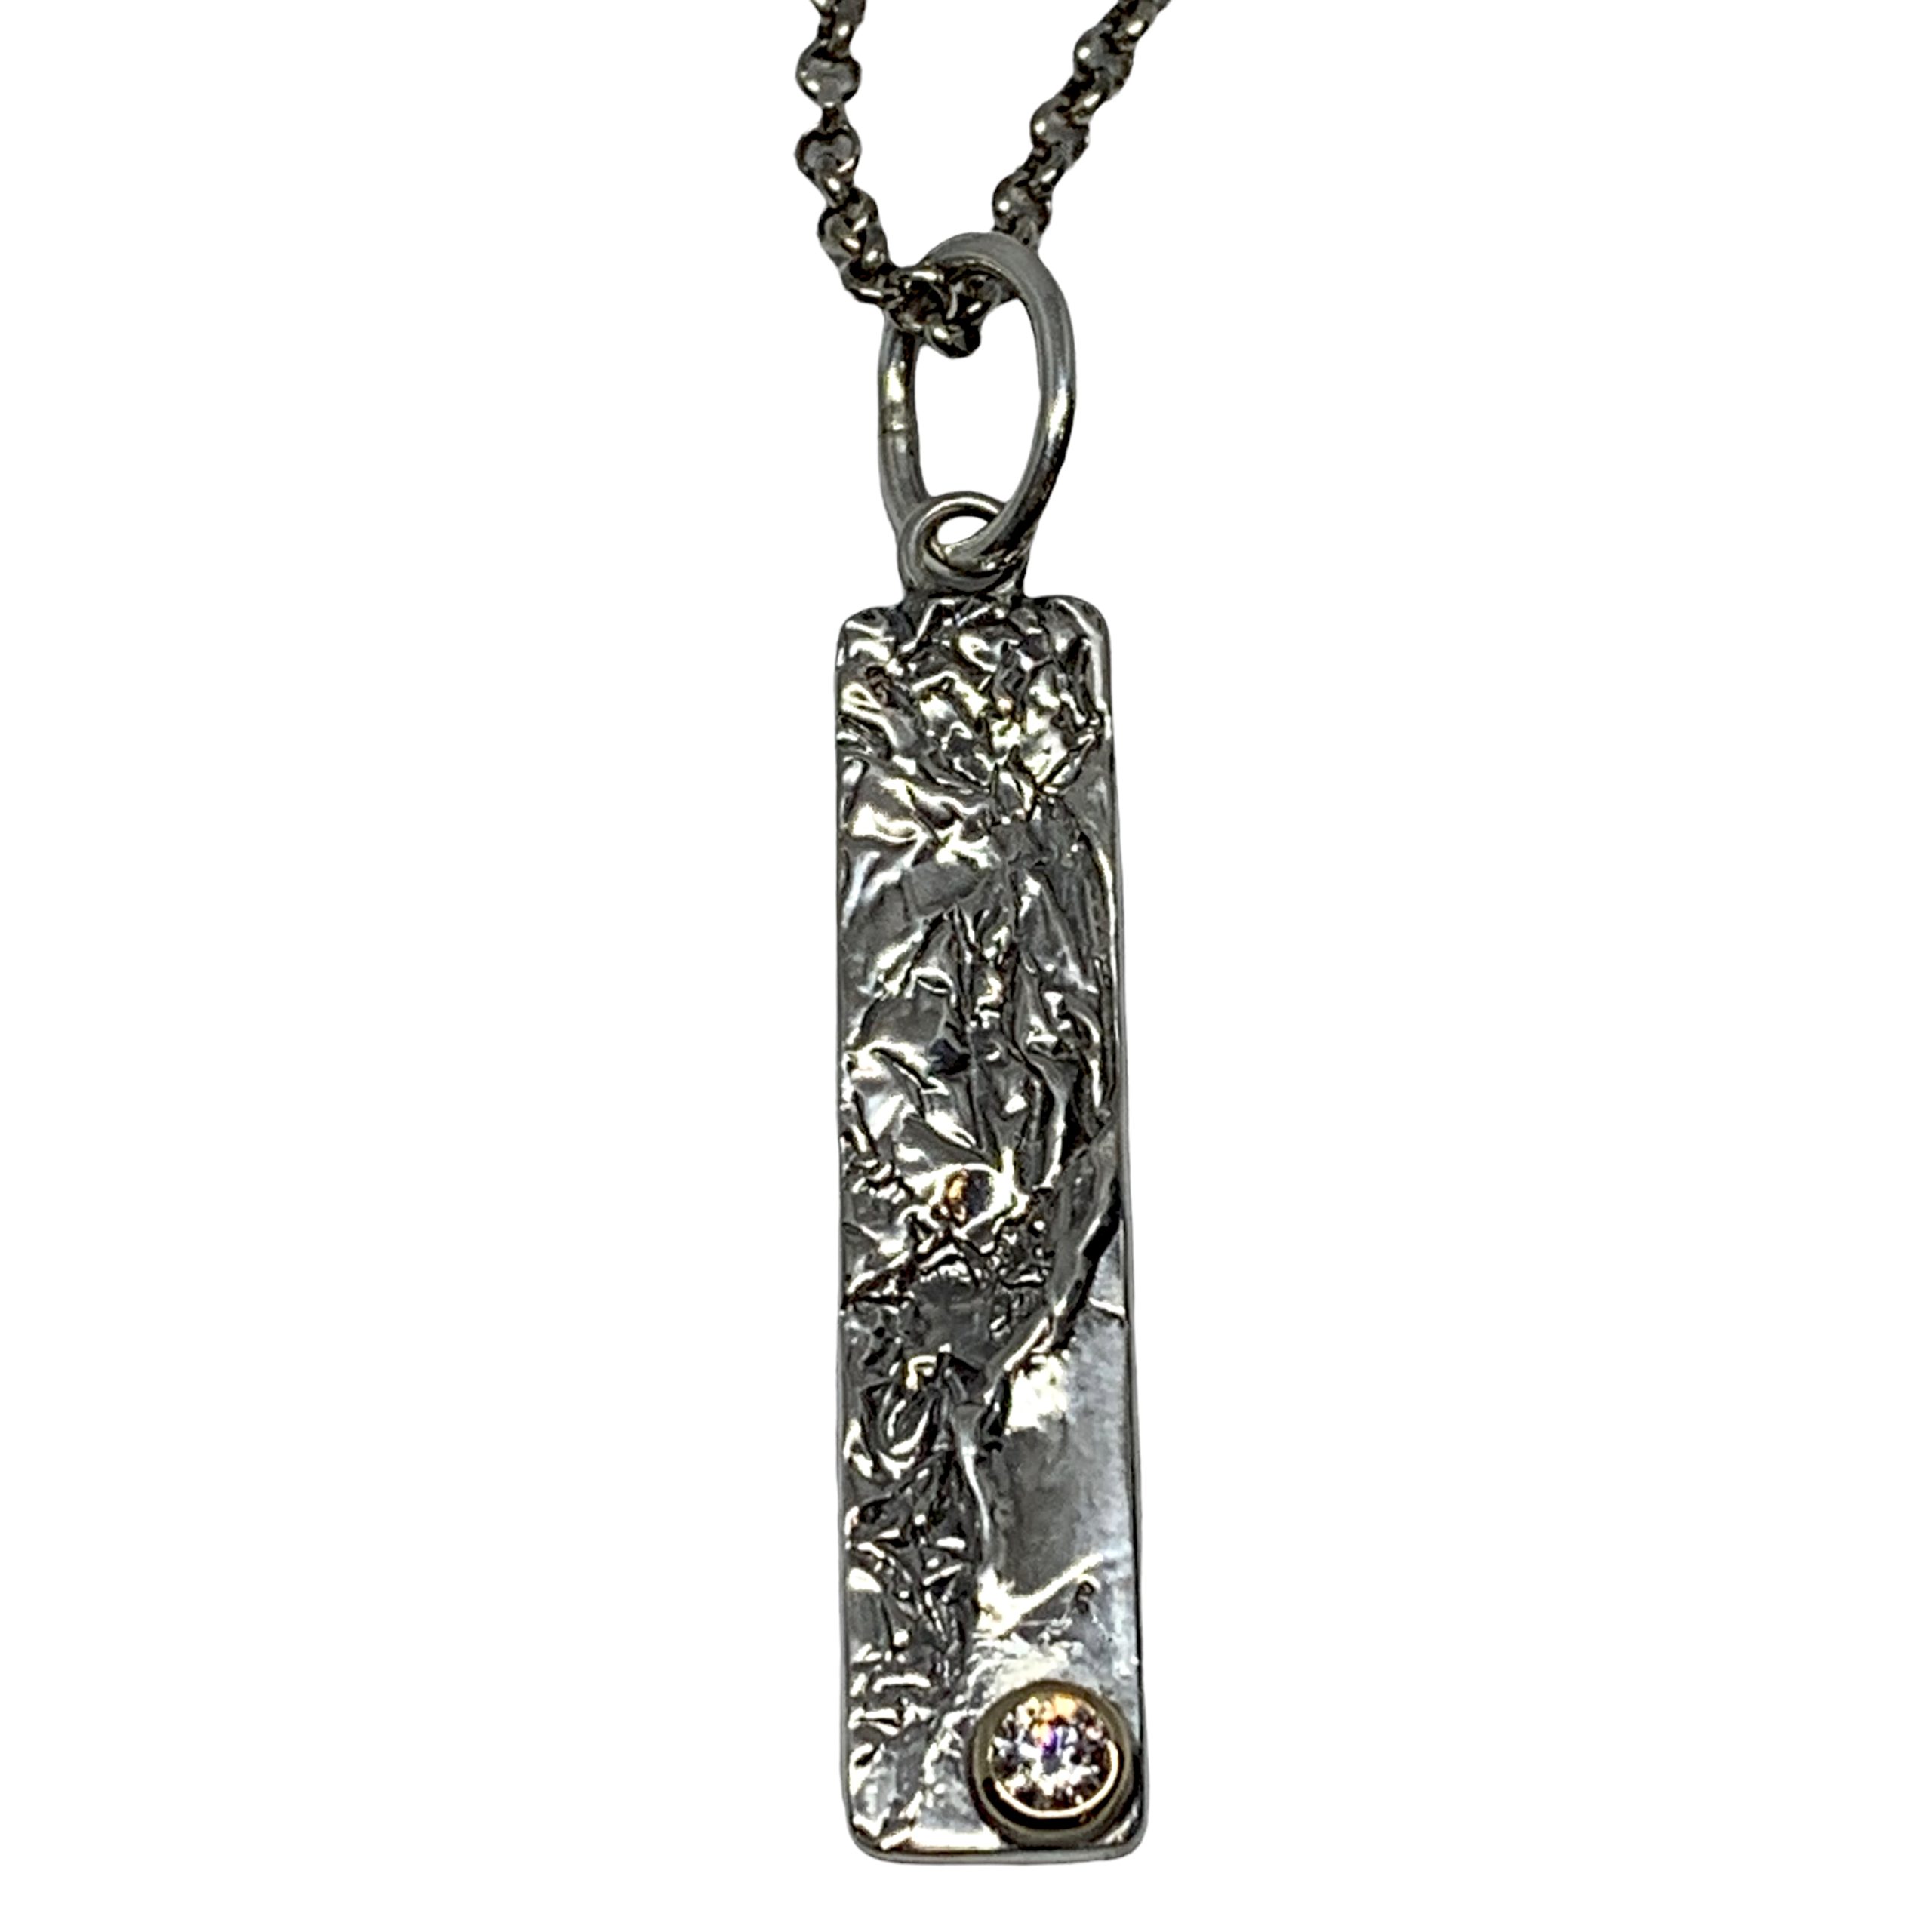 Handmade sterling silver, bronze, and CZ pendant by Karyn Chopik | Effusion Art Gallery + Cast Glass Studio, Invermere BC